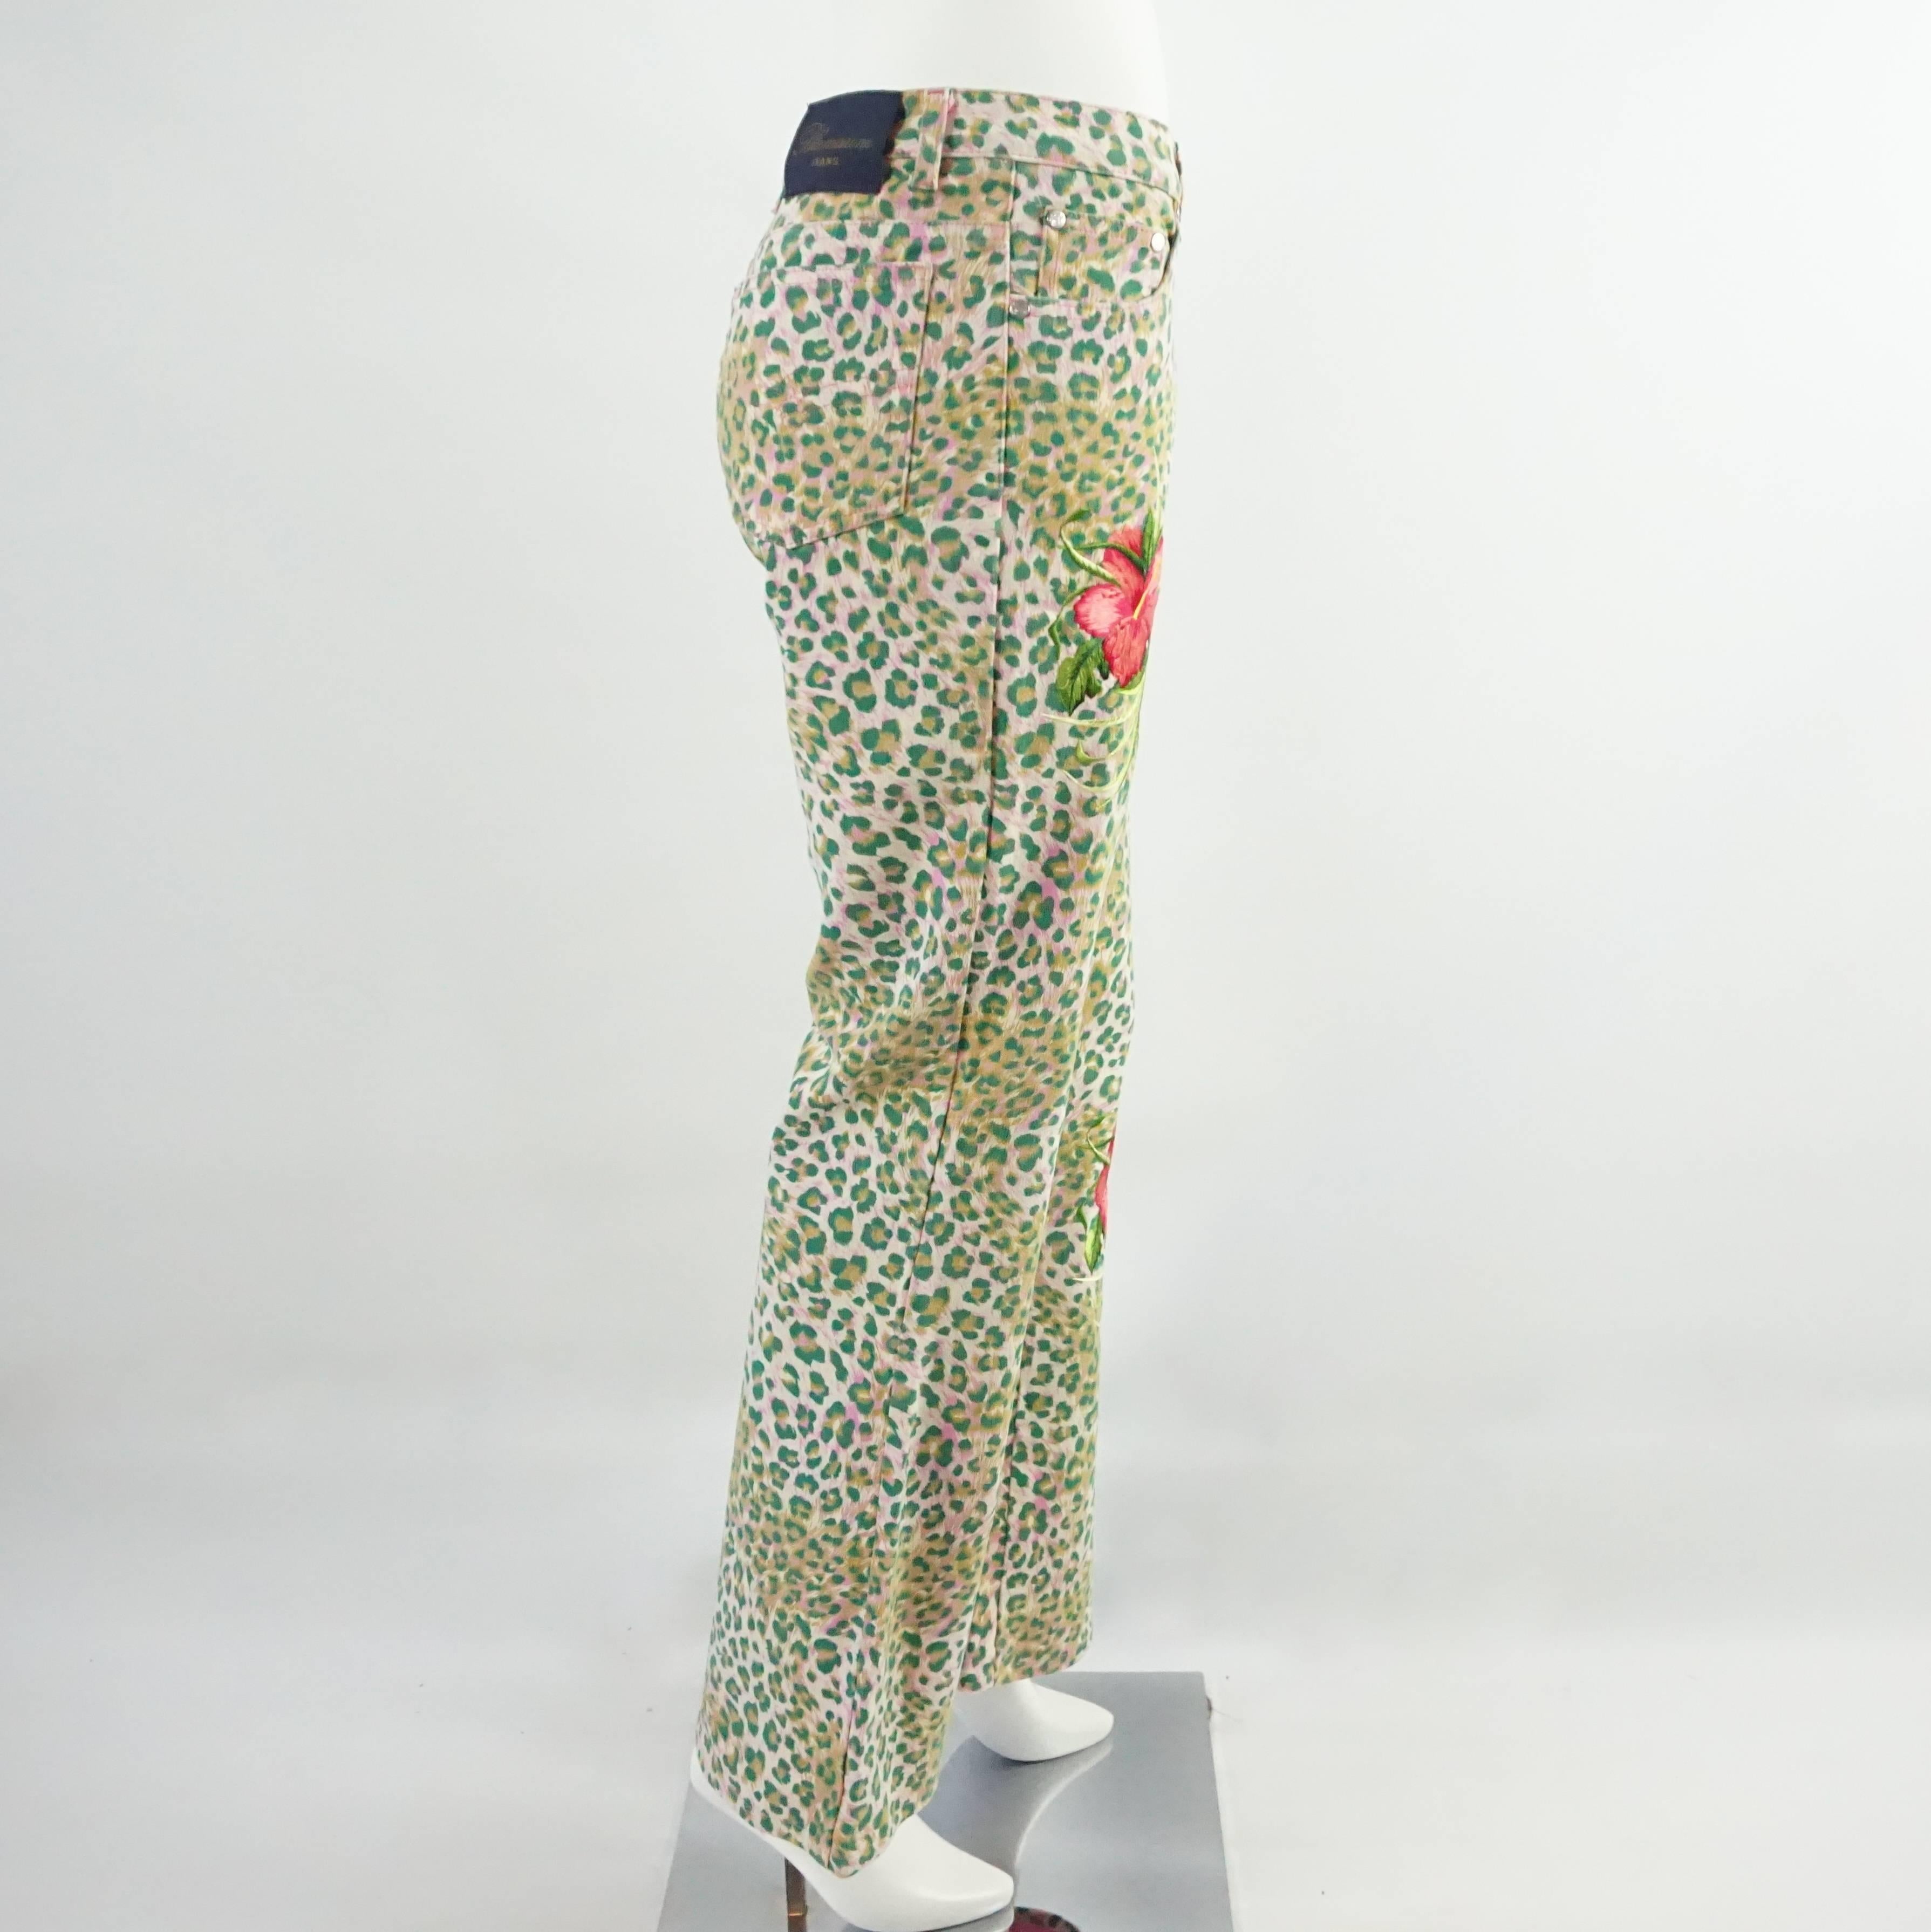 These eye-catching Blumarine jeans are pink and green animal print with flowers embroidered on them. The pant legs flare out slightly. These jeans are in excellent condition with the button somewhat loose. Size 42.

Measurements
Waist: